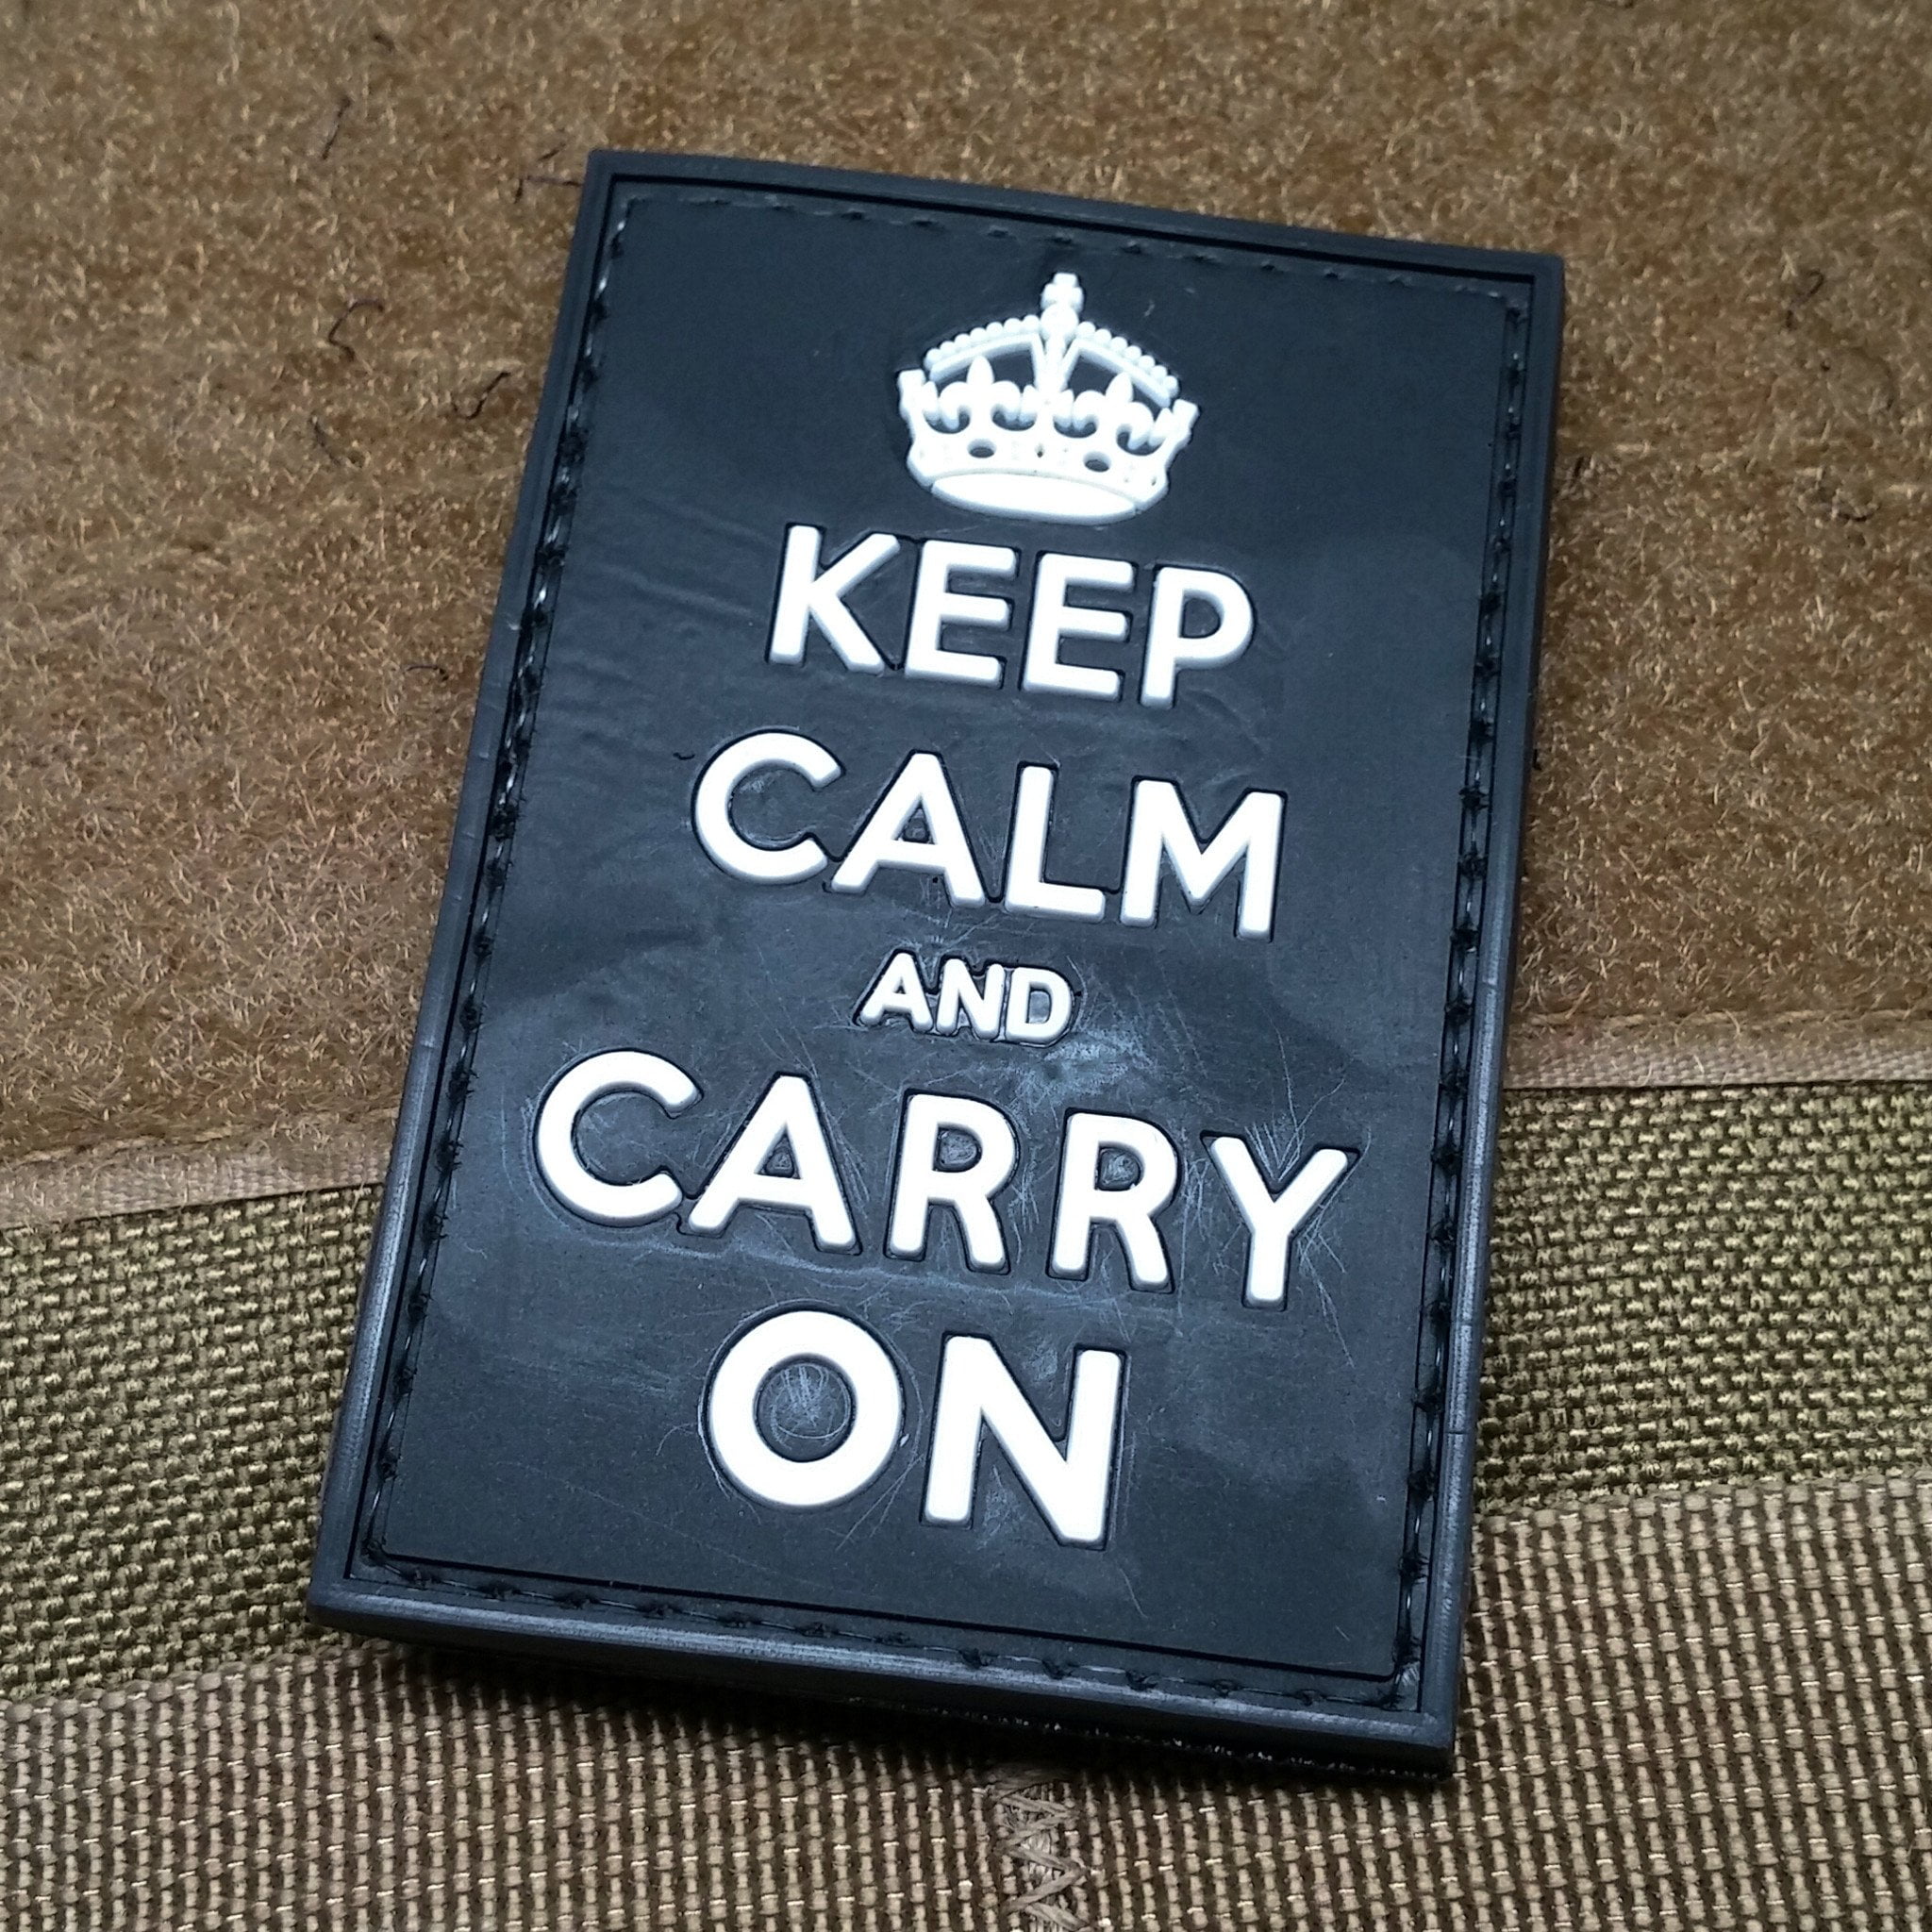 Keep Calm And Carry On Pvc Morale Patch Velcro Morale Patch By Neo